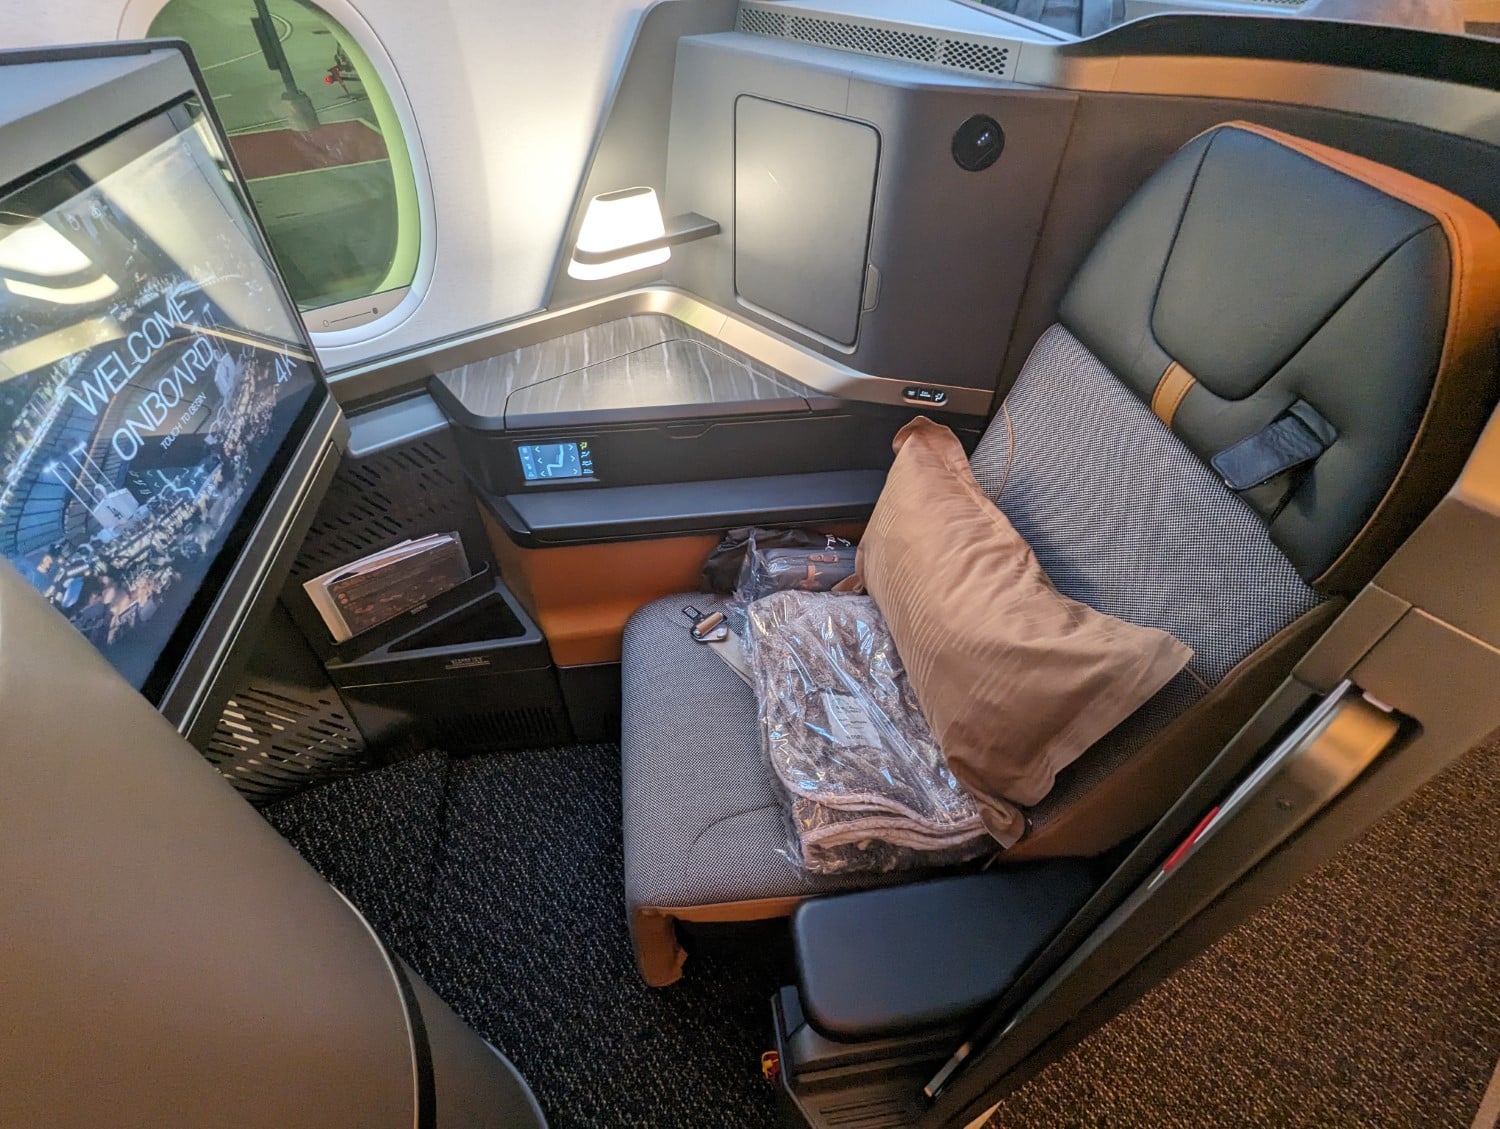 Starlux airlines A350 business class seat.